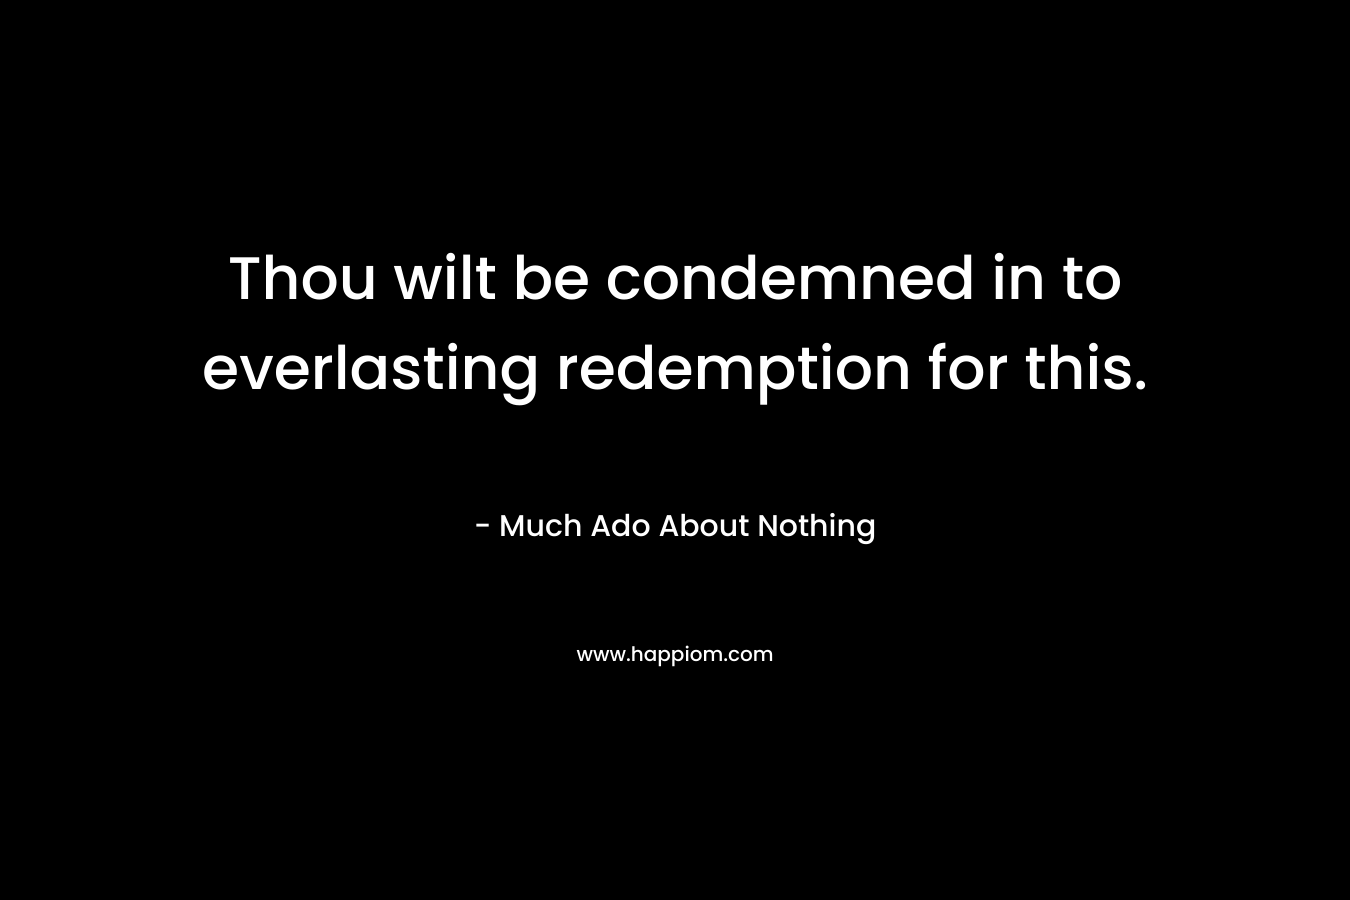 Thou wilt be condemned in to everlasting redemption for this. – Much Ado About Nothing